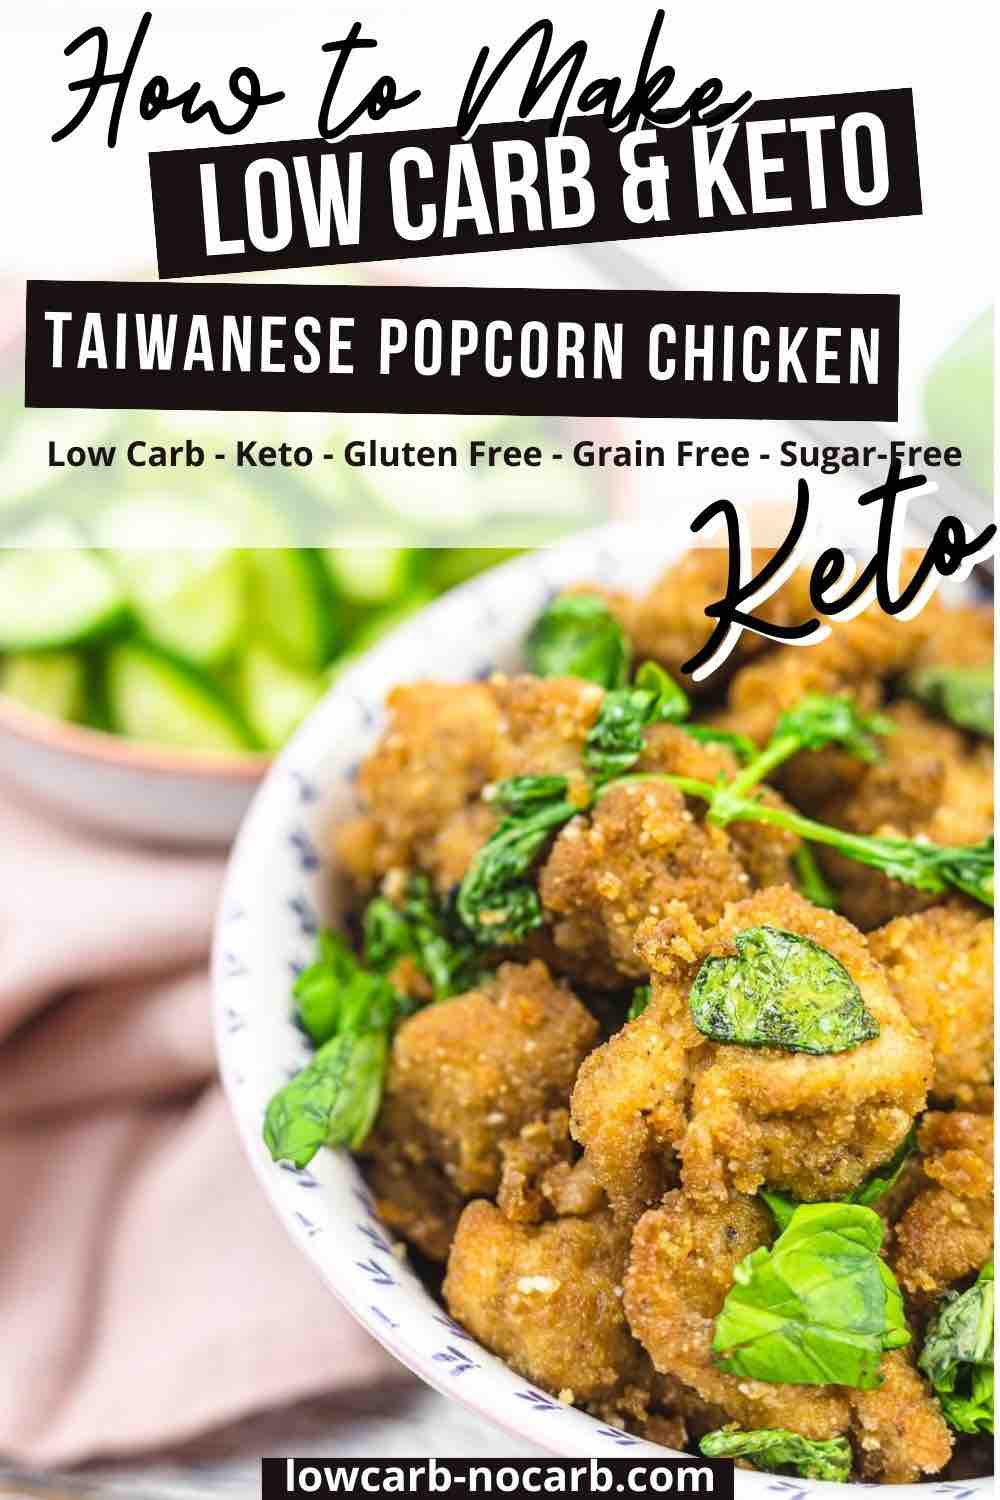 A bowl of taiwanese popcorn chicken with fresh basil leaves, labeled as low carb and keto-friendly, served on a table with a kitchen towel.